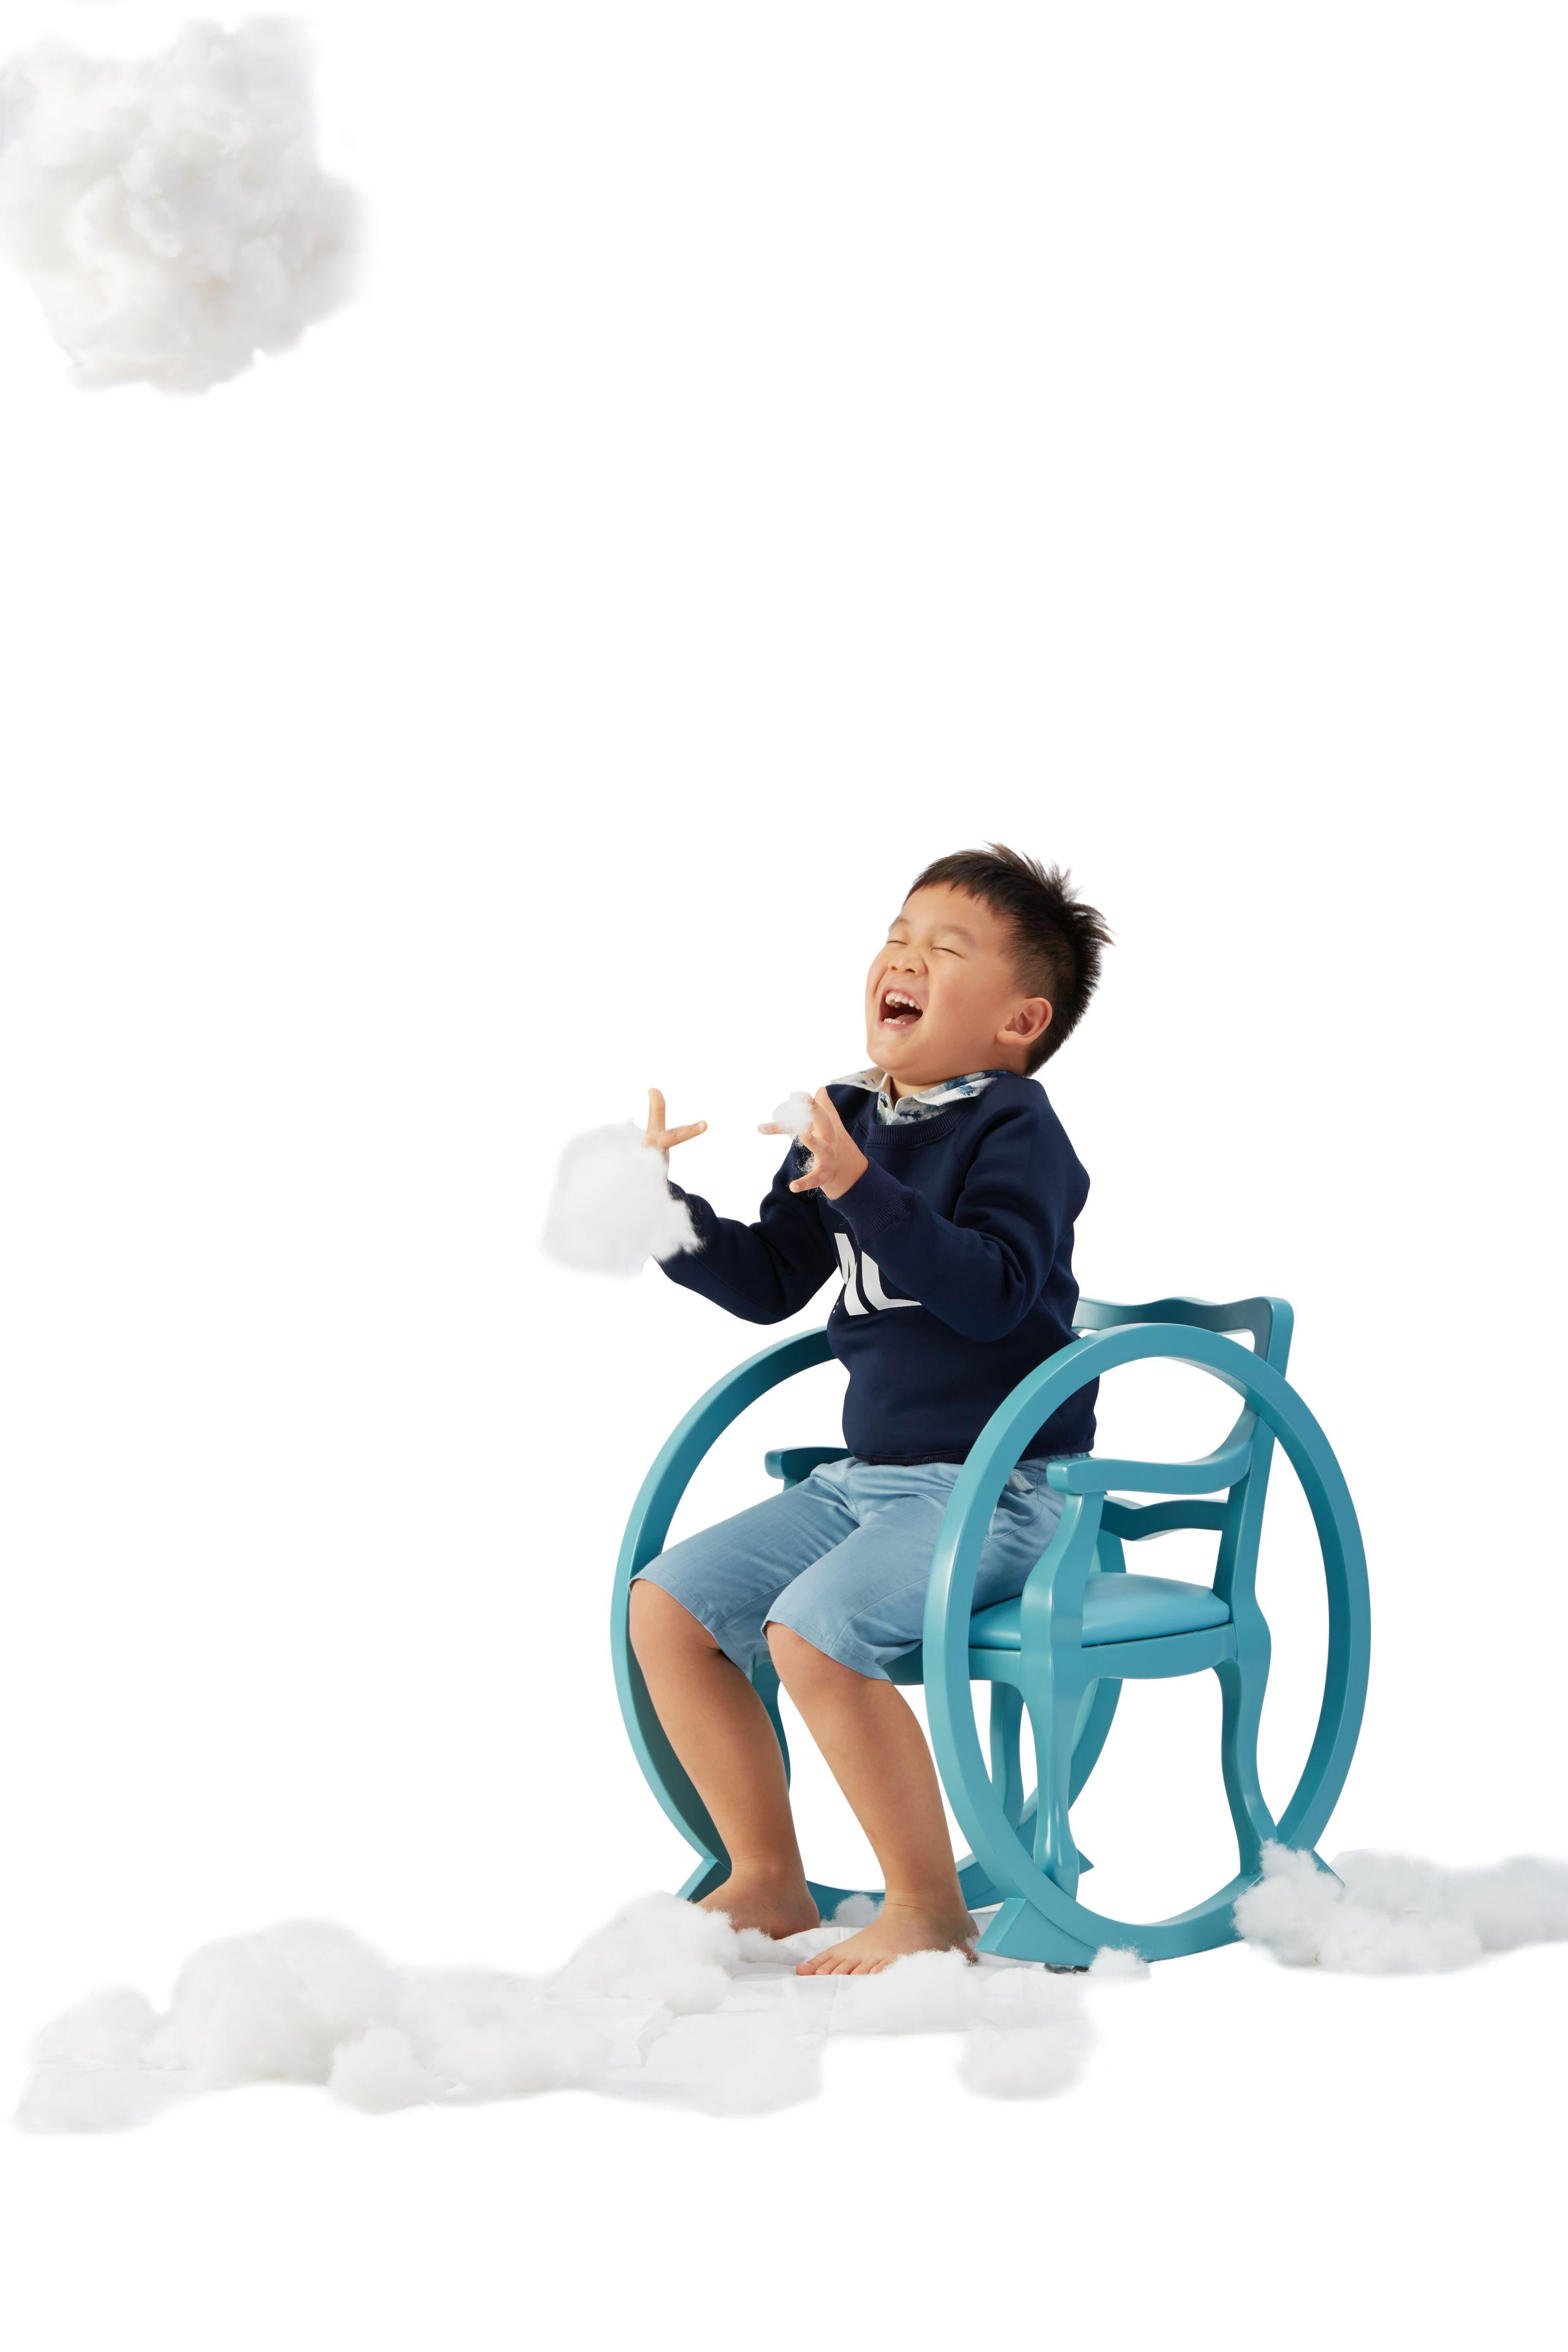 Kids contemporary rocking chair designed by Thomas Dariel, Maison Dada
Measures: W45.5 x D55 x H56 cm
Structure in solid beech with matte painted finish
Upholstery in leather
Available in 2 colors (Sky Blue or Dusty Pink)
Tick-tock, tick-tock, as